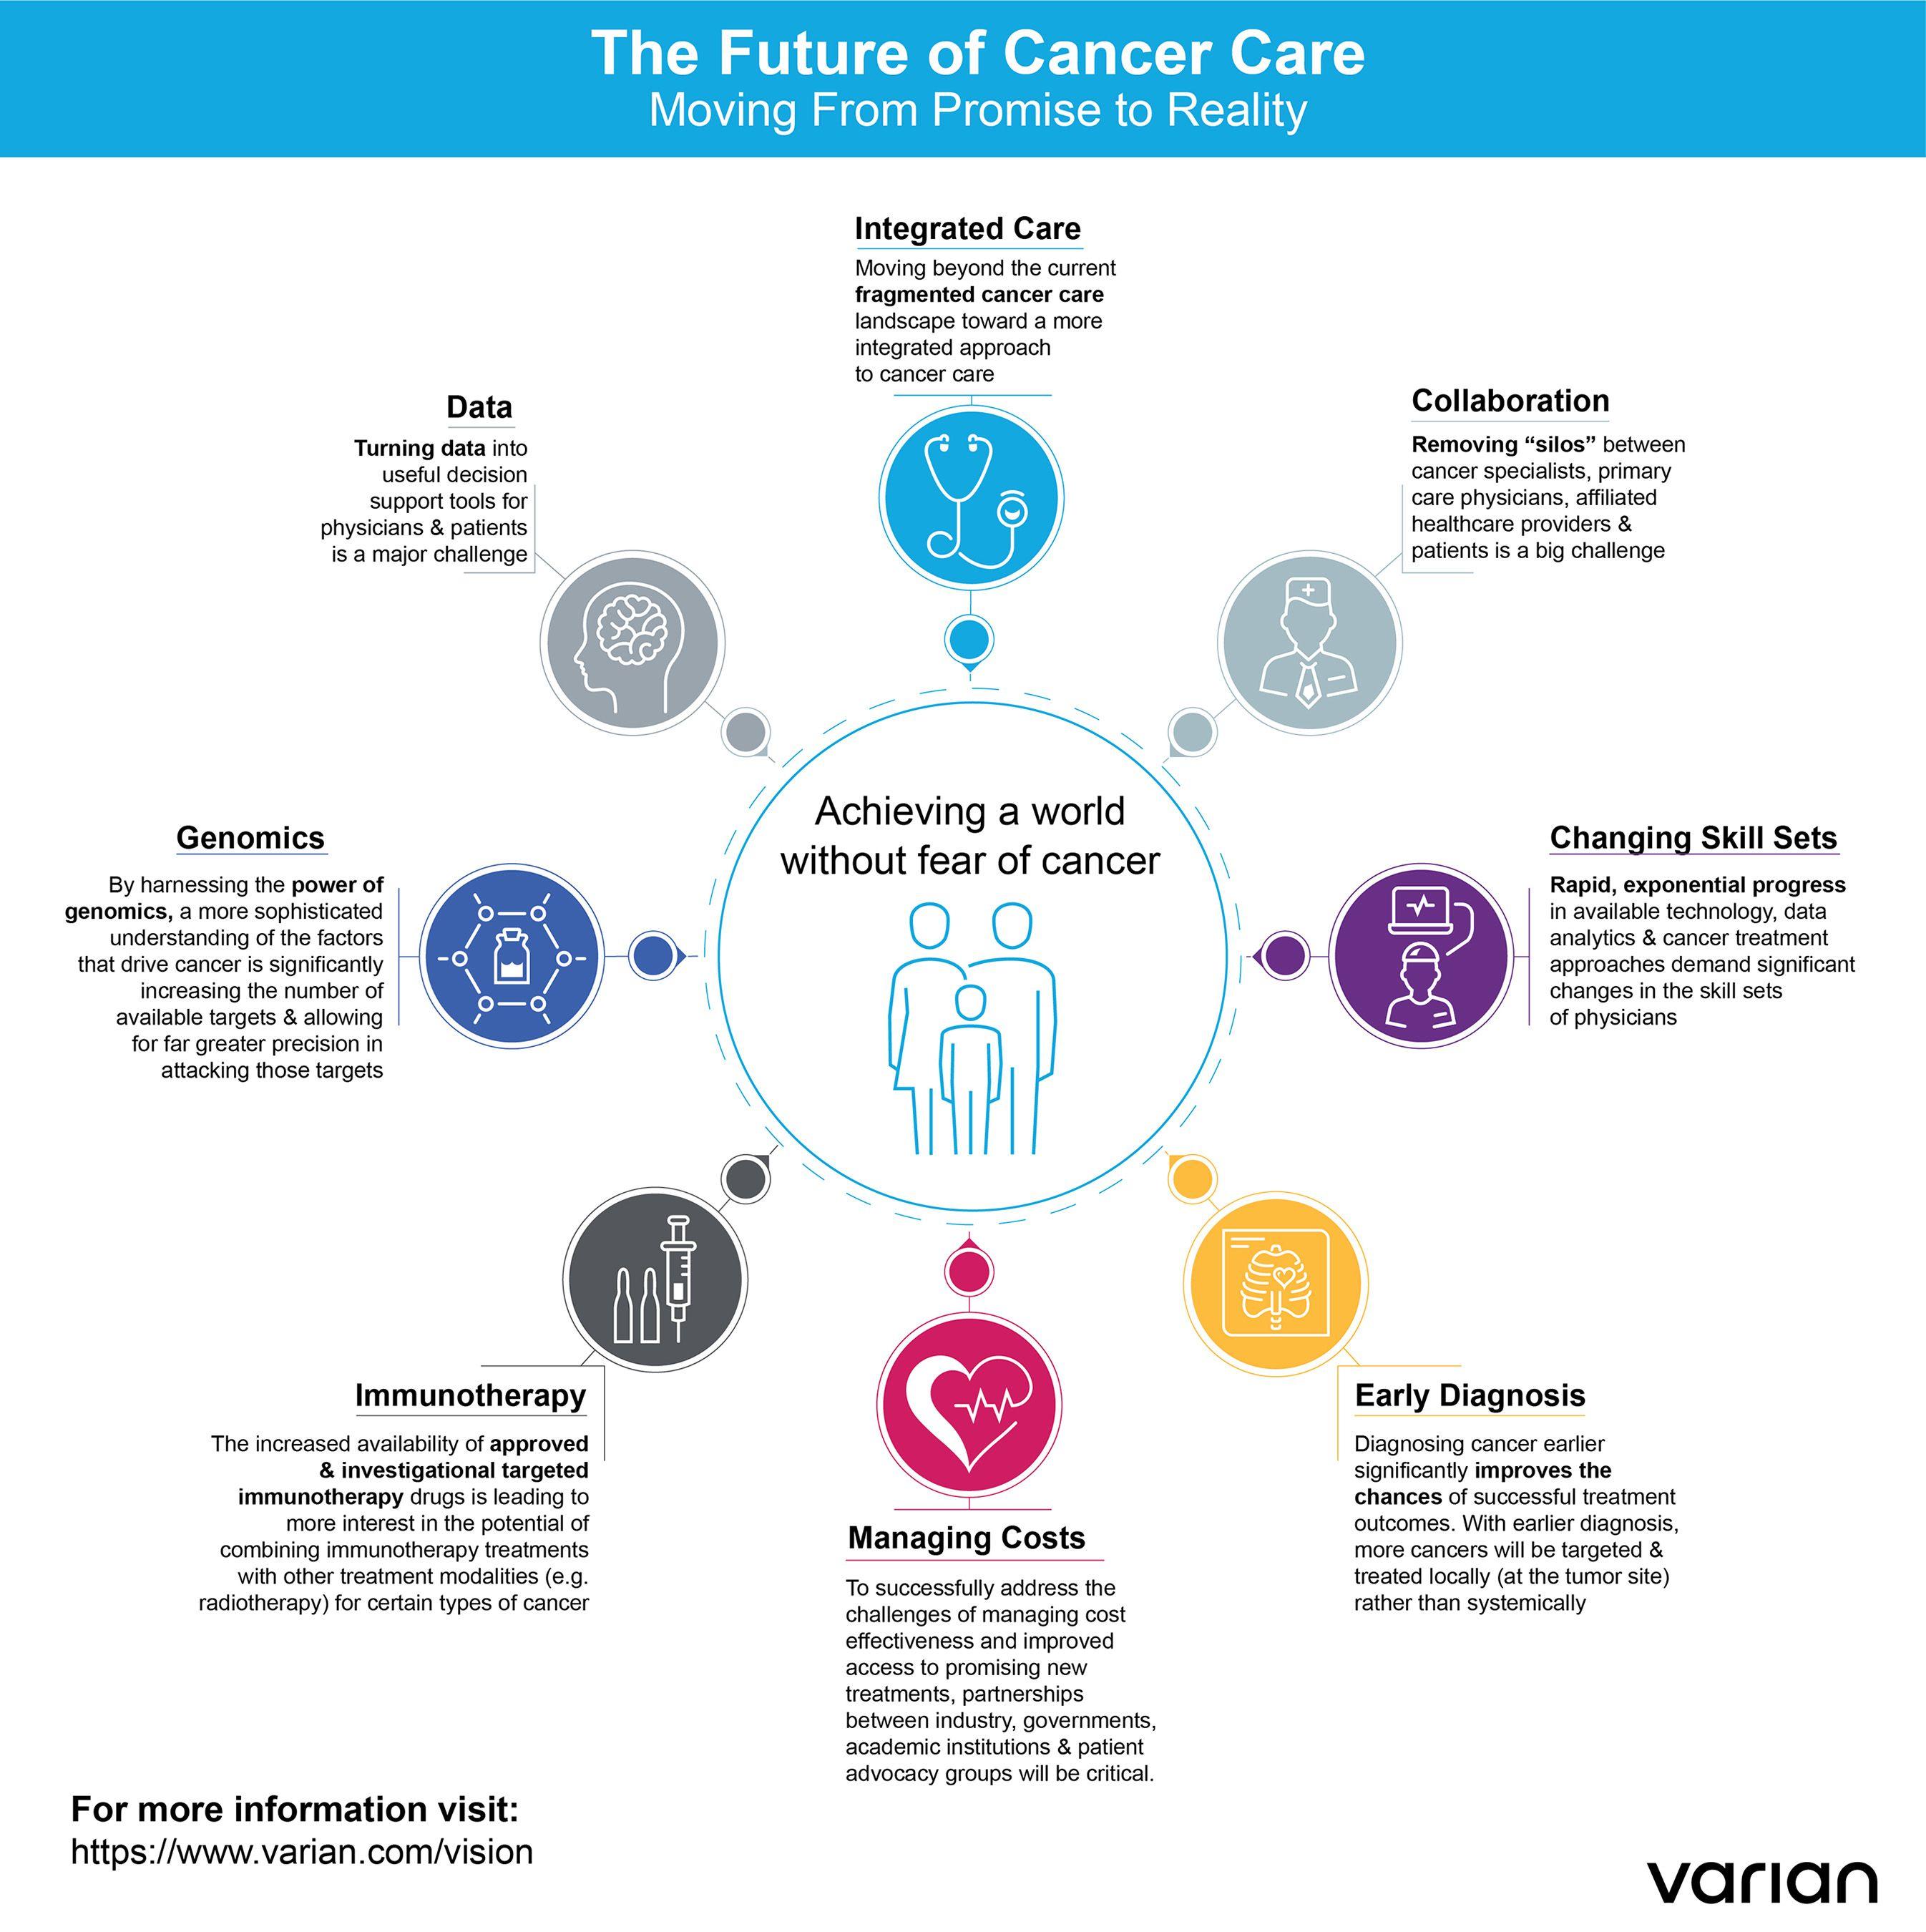 Varian Logo - Varian Shares Vision of a World Without Fear of Cancer. Varian